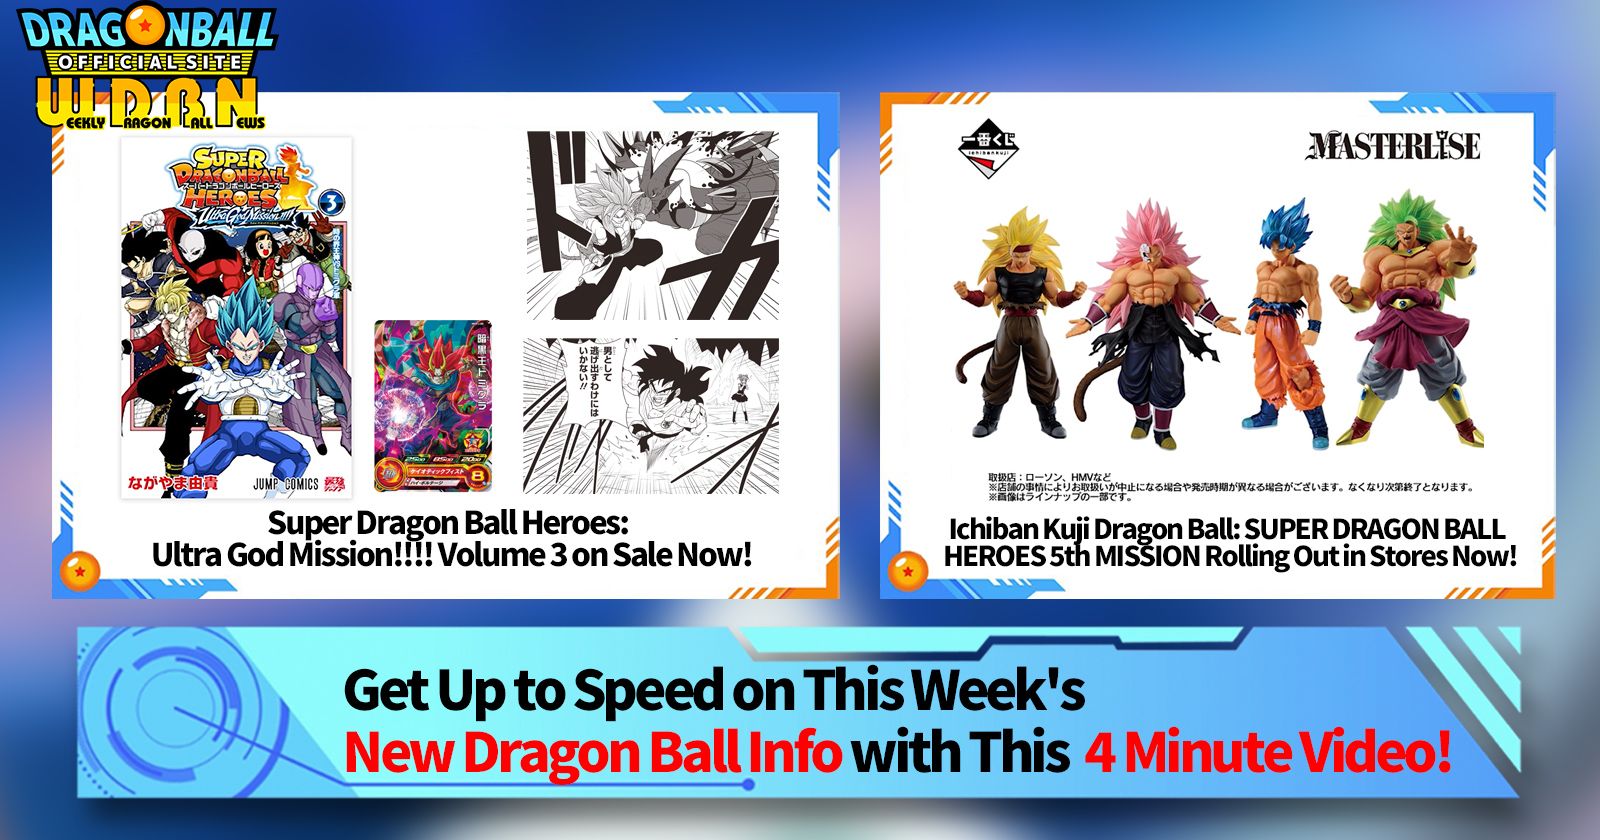 [December 11th] Weekly Dragon Ball News Broadcast!